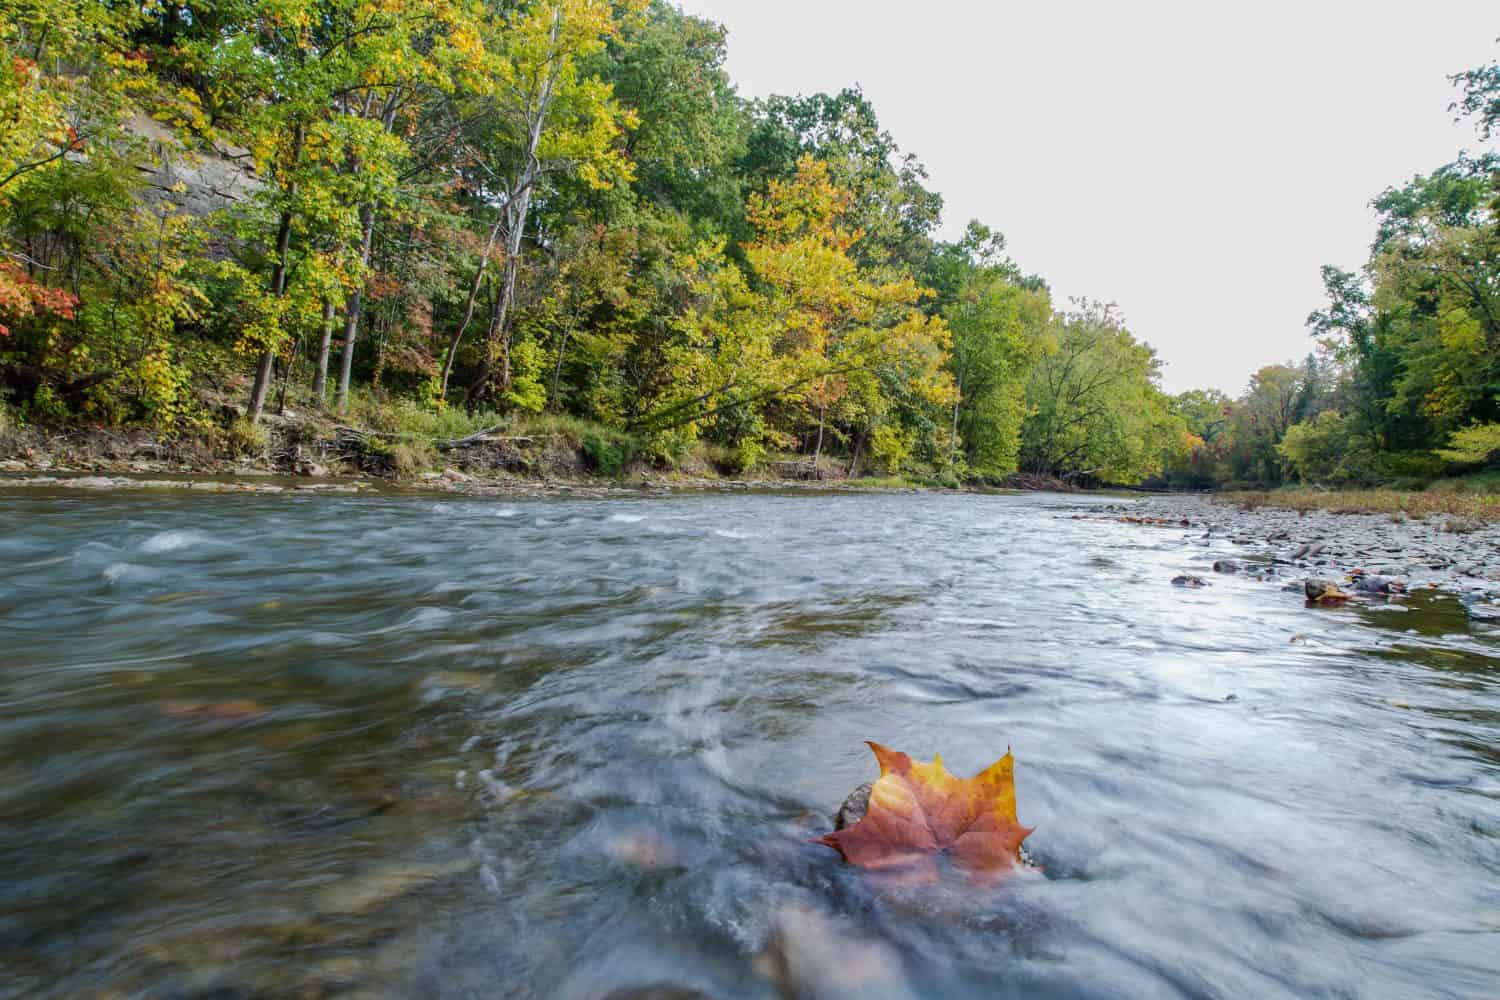 leaf in river. this is rocky river in ohio. feel of water flow in autumn season.